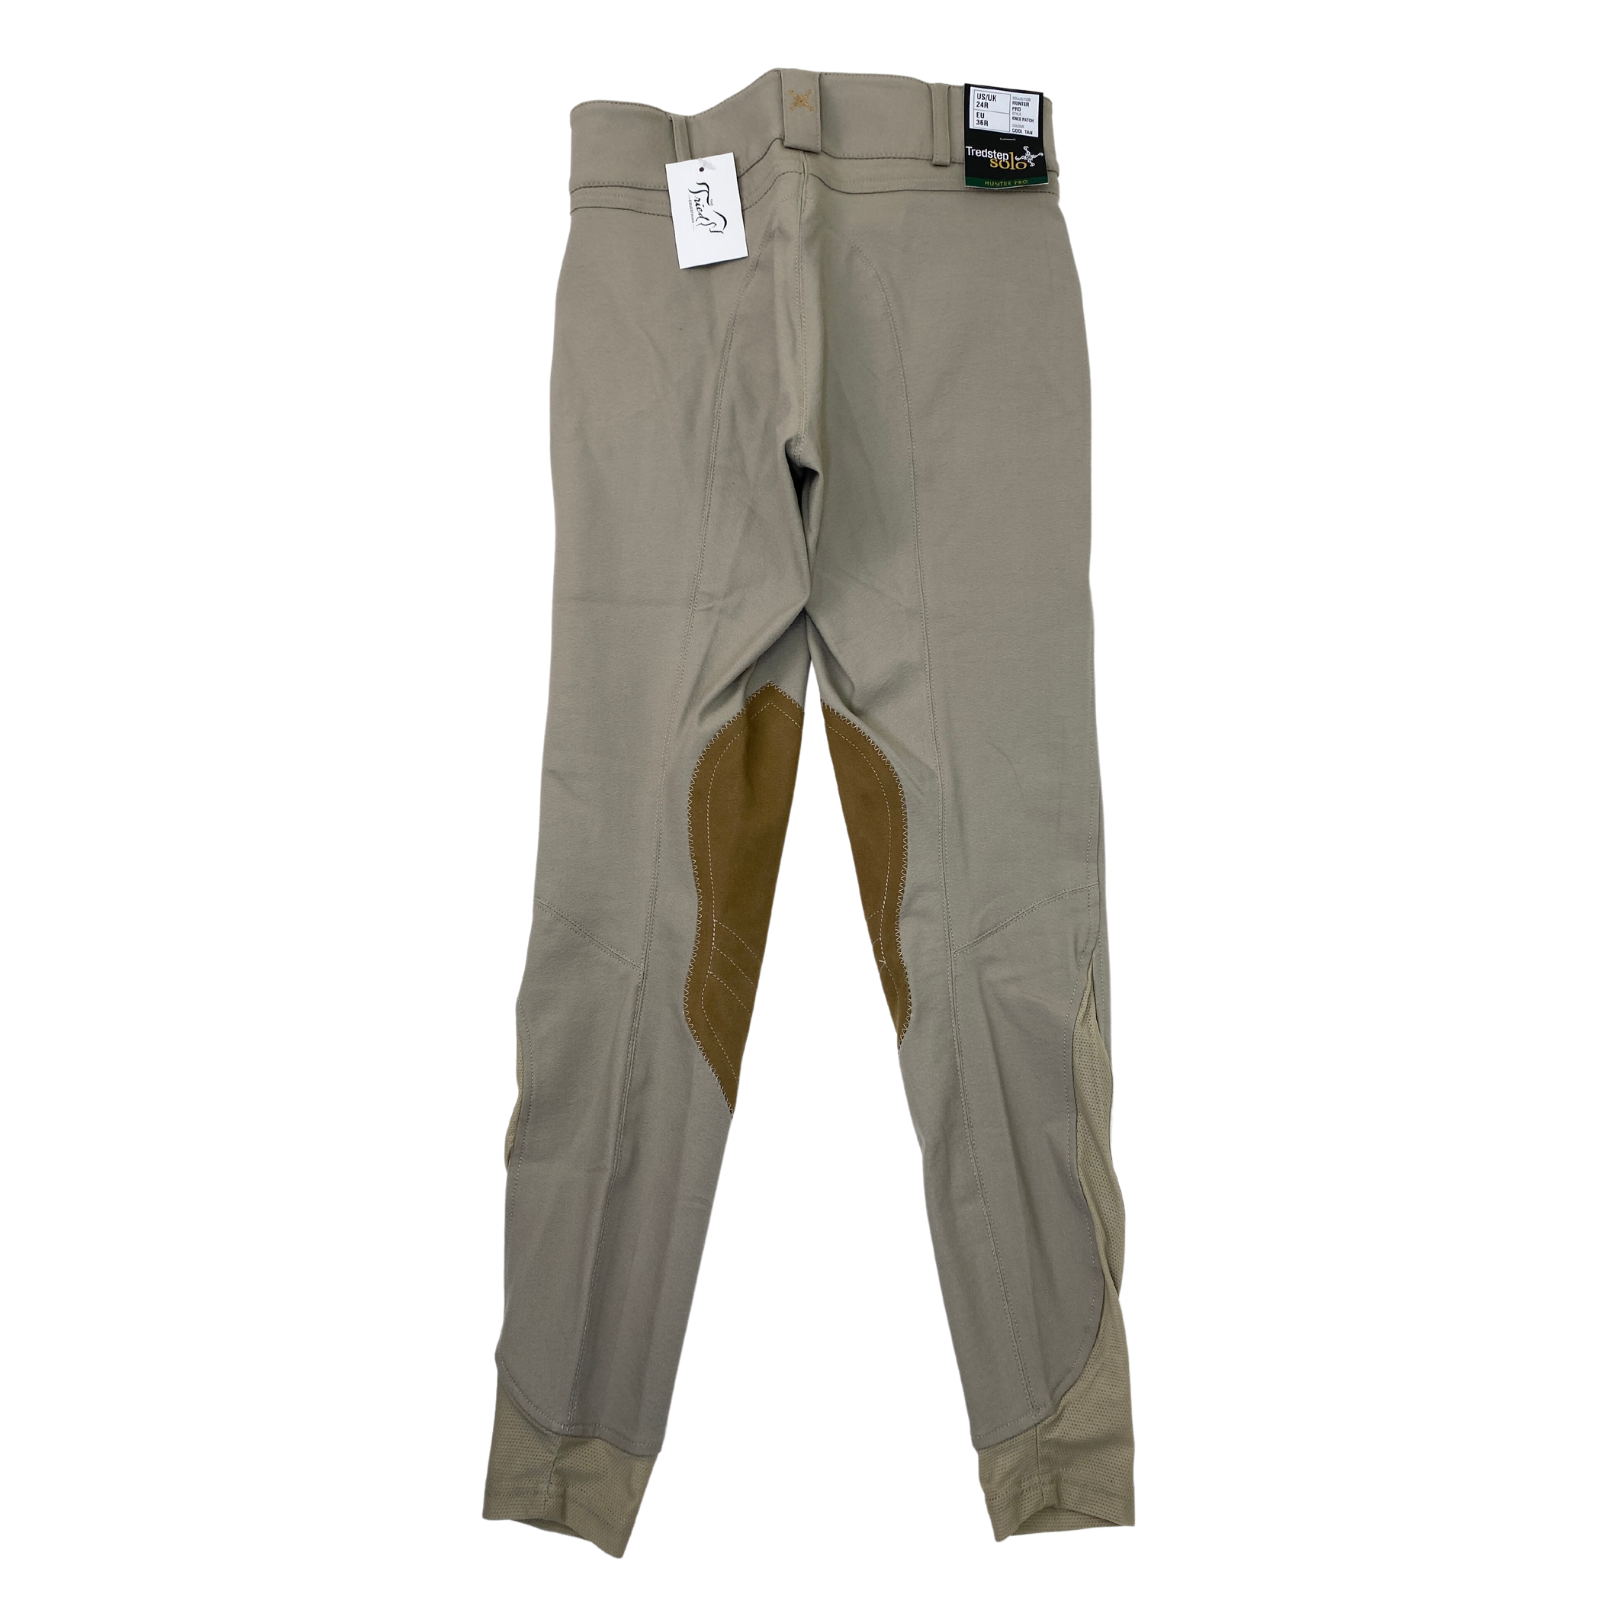 Back of Tredstep Solo 'Hunter Pro' Breeches in Tan